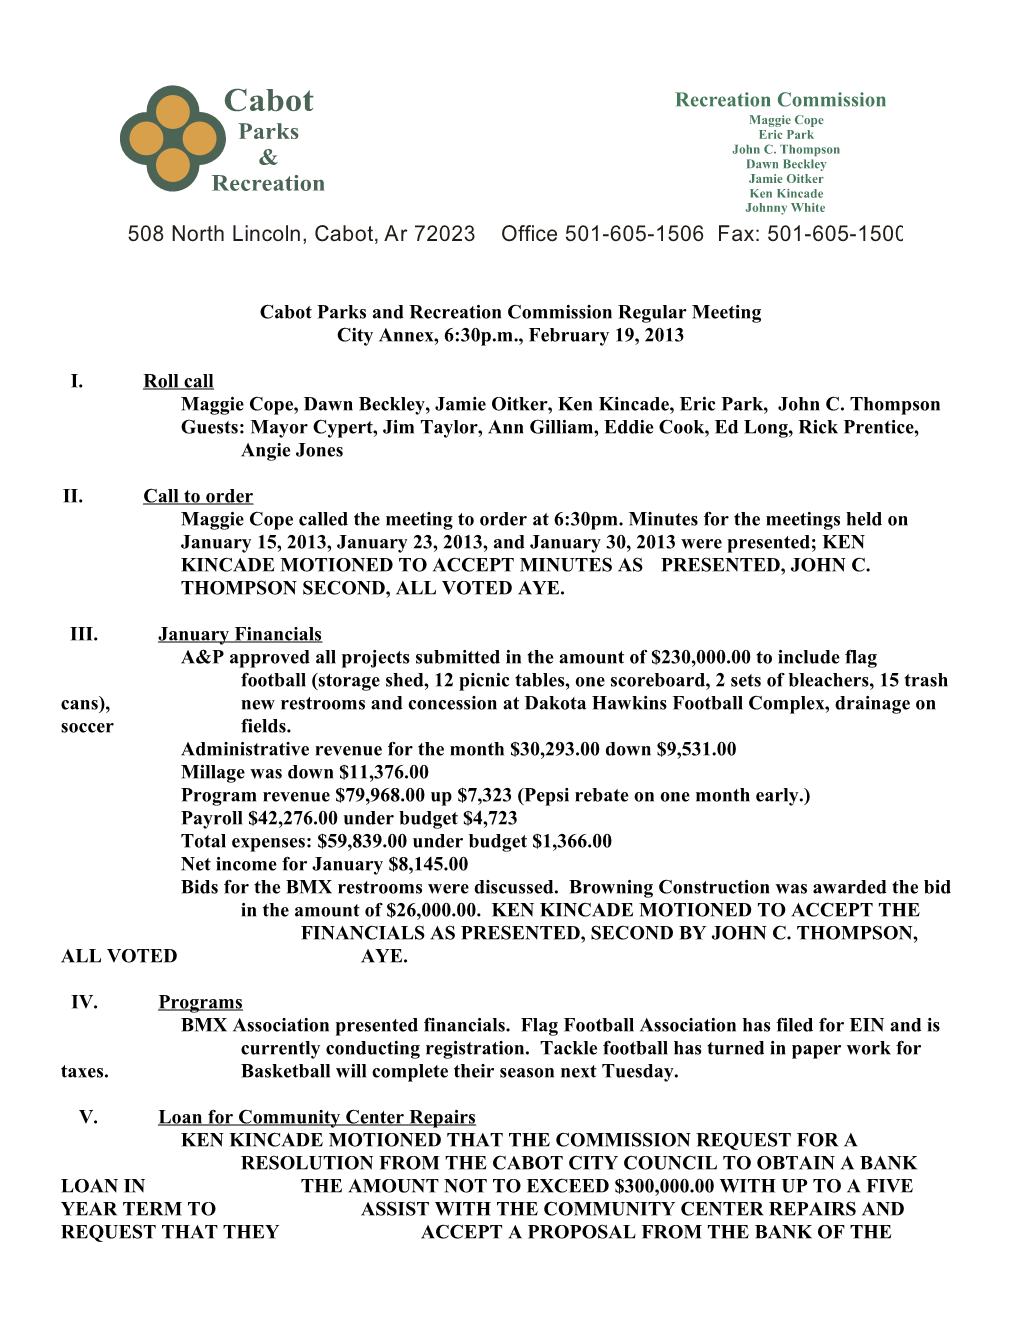 Cabot Parks and Recreation Commission Special Meeting